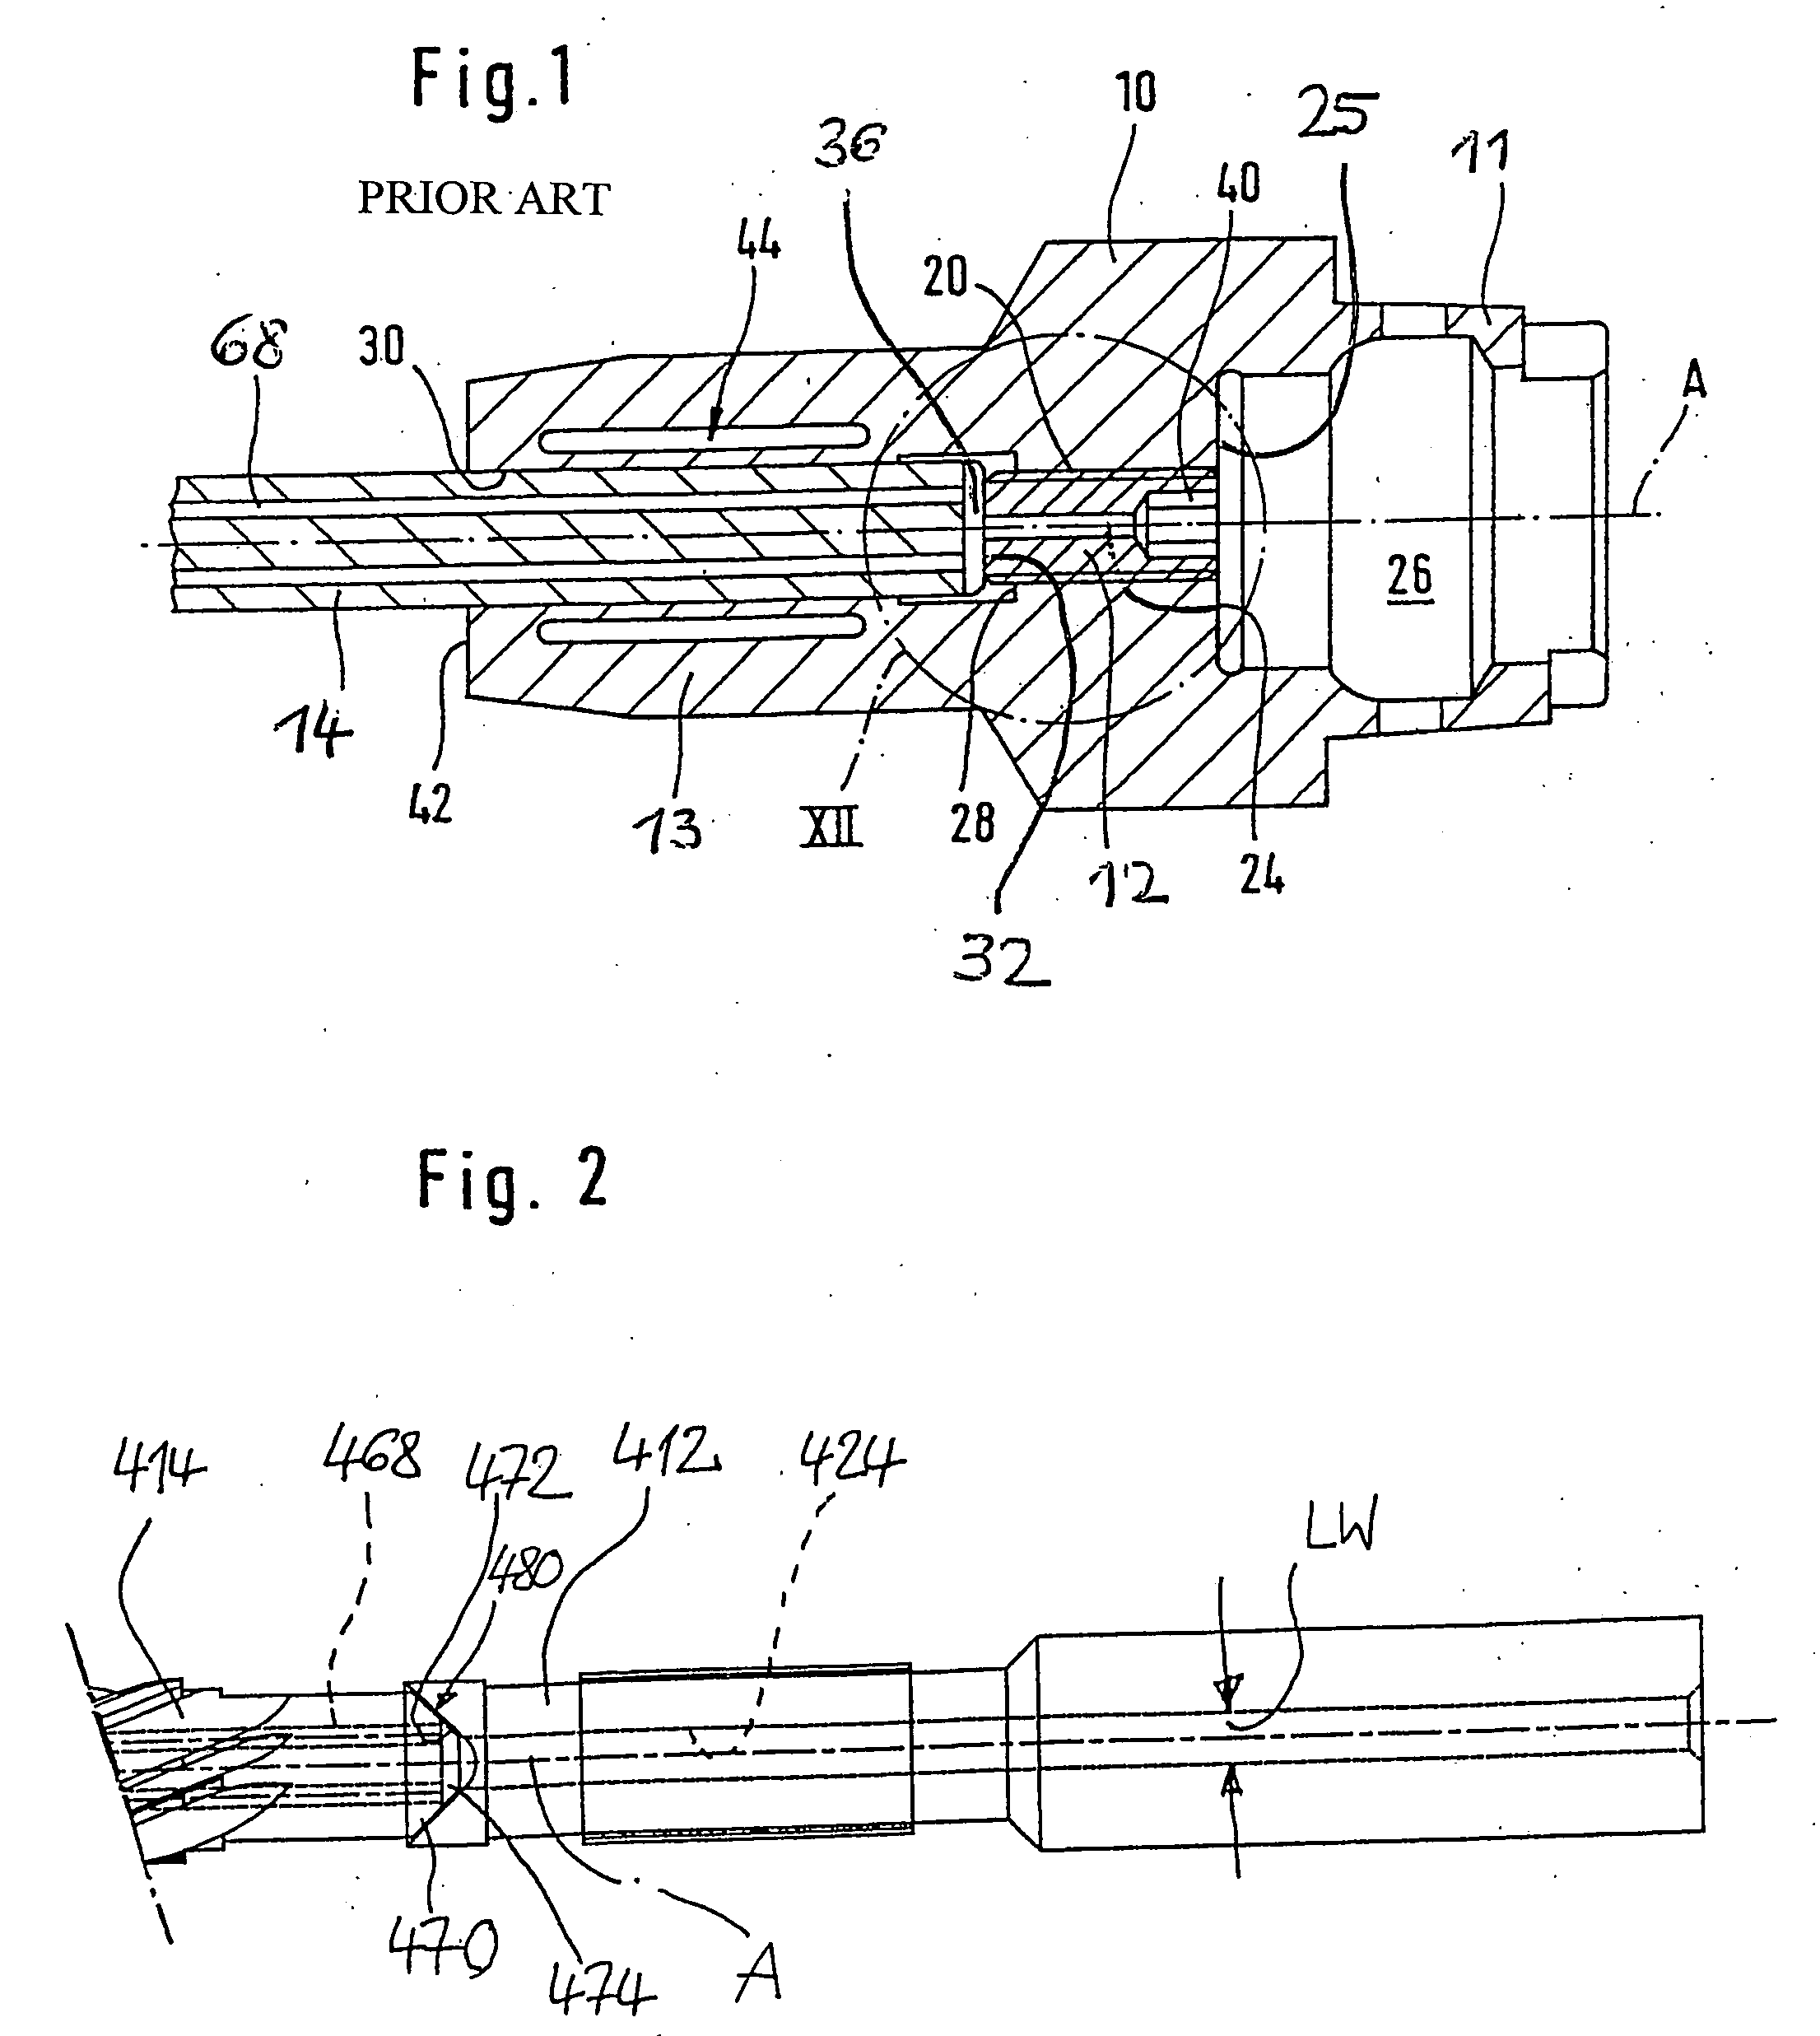 Shaft tool and associated coolant/lubricant feeding point